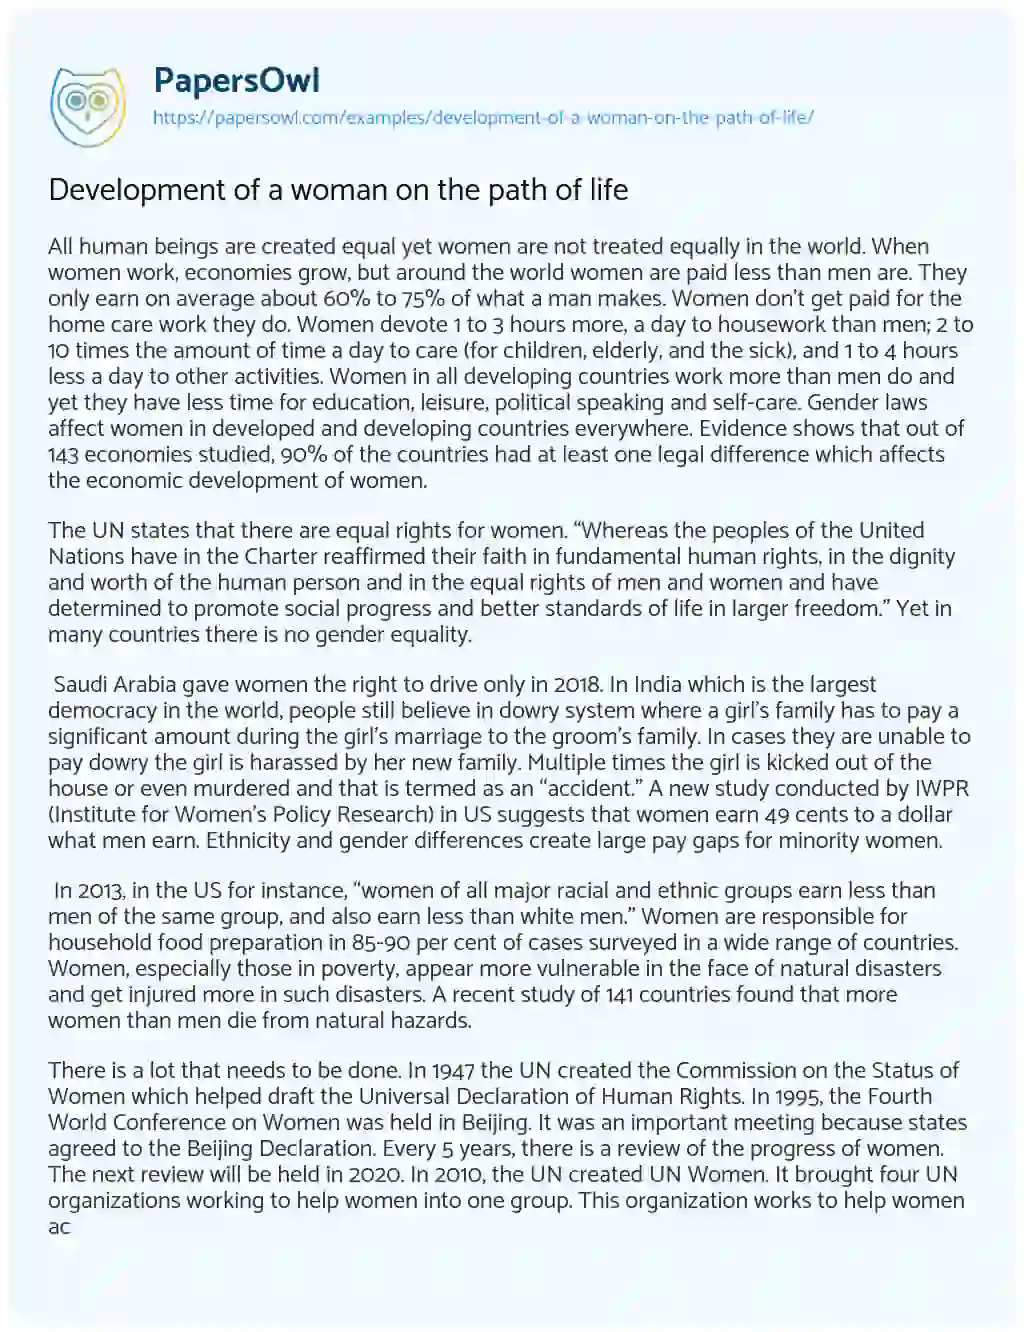 Essay on Development of a Woman on the Path of Life